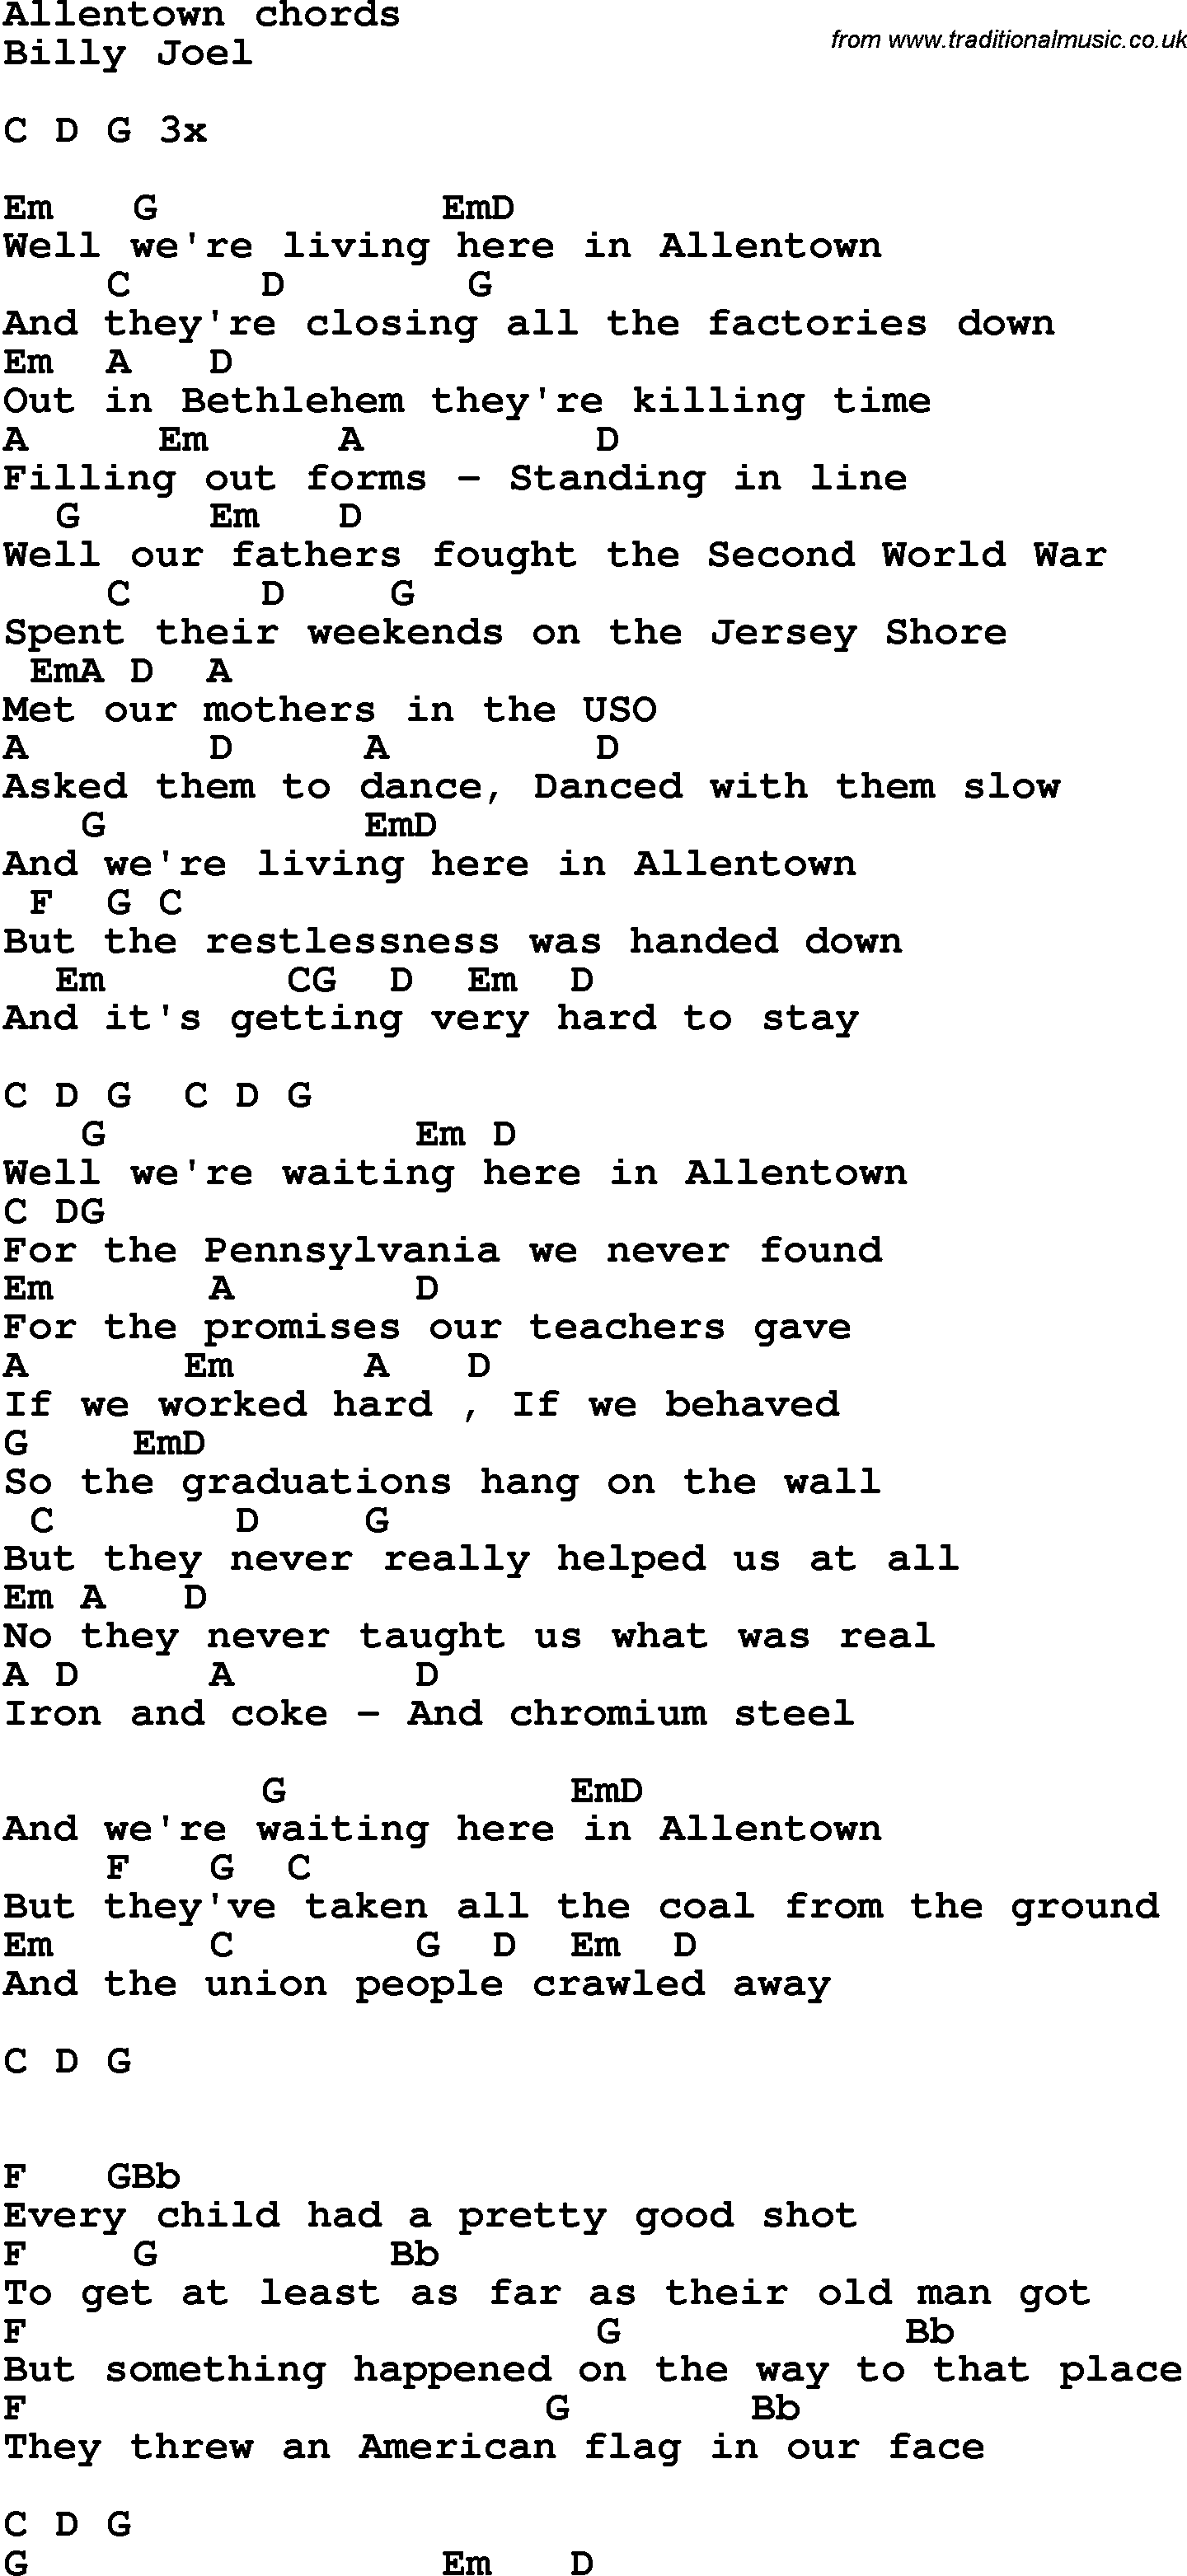 Song Lyrics with guitar chords for Allentown - Billy Joel